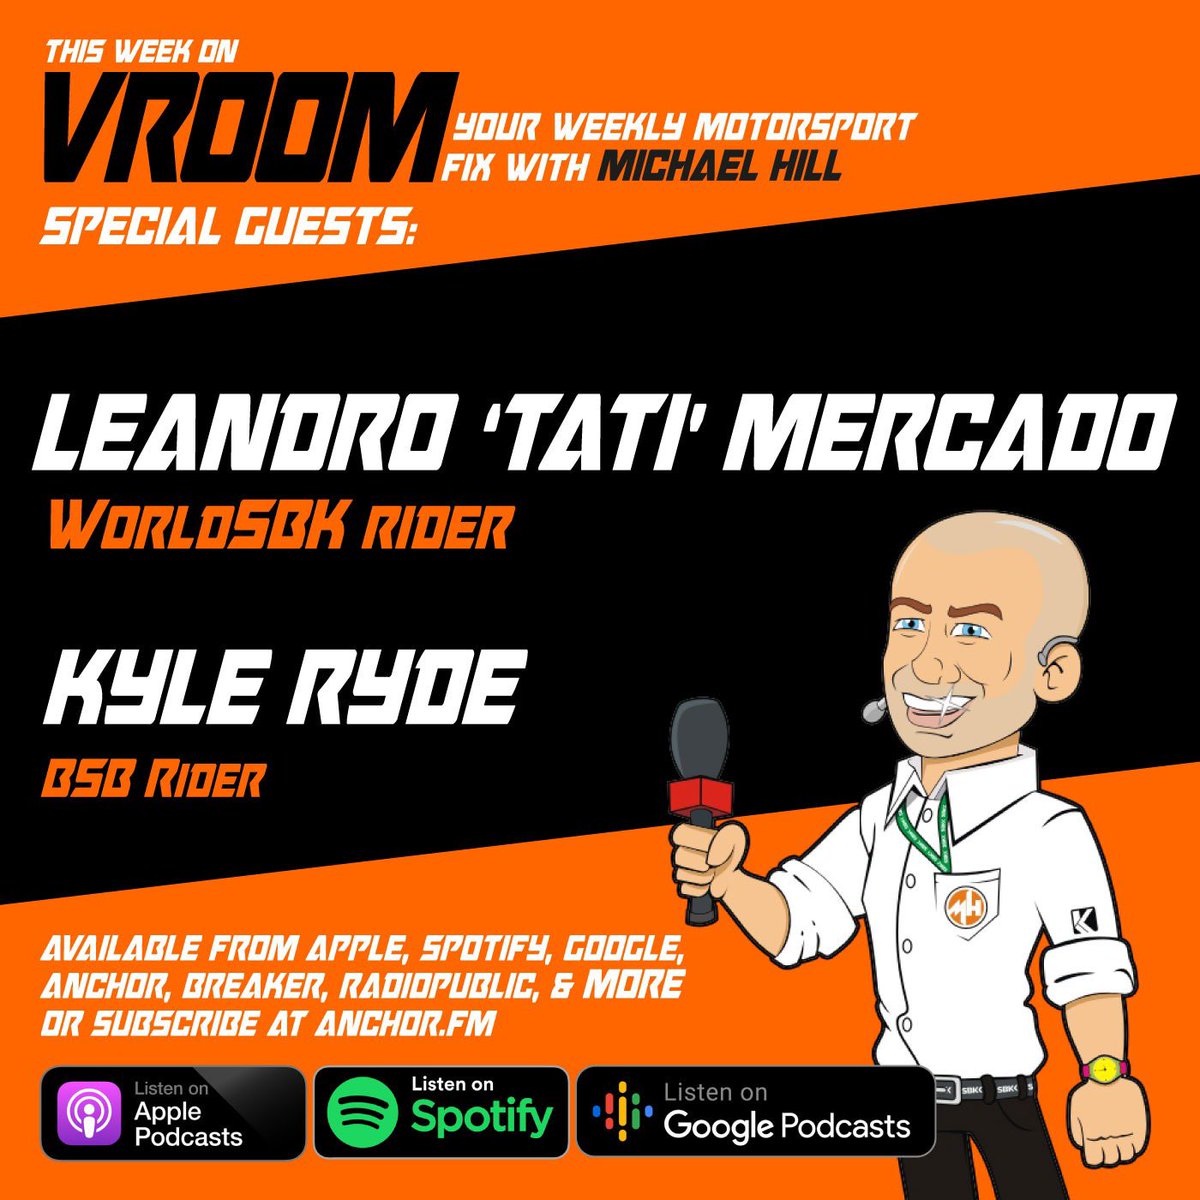 This weeks #VROOM podcast has it all... tears, laughs and some of the funniest paddock memories from @kyleryde and @TatiMercado36. Expertly edited once again by @garethbouch SUBSCRIBE, DOWNLOAD and LISTEN from 3pm UK TIME 🎧 anchor.fm/Vroom-podcast